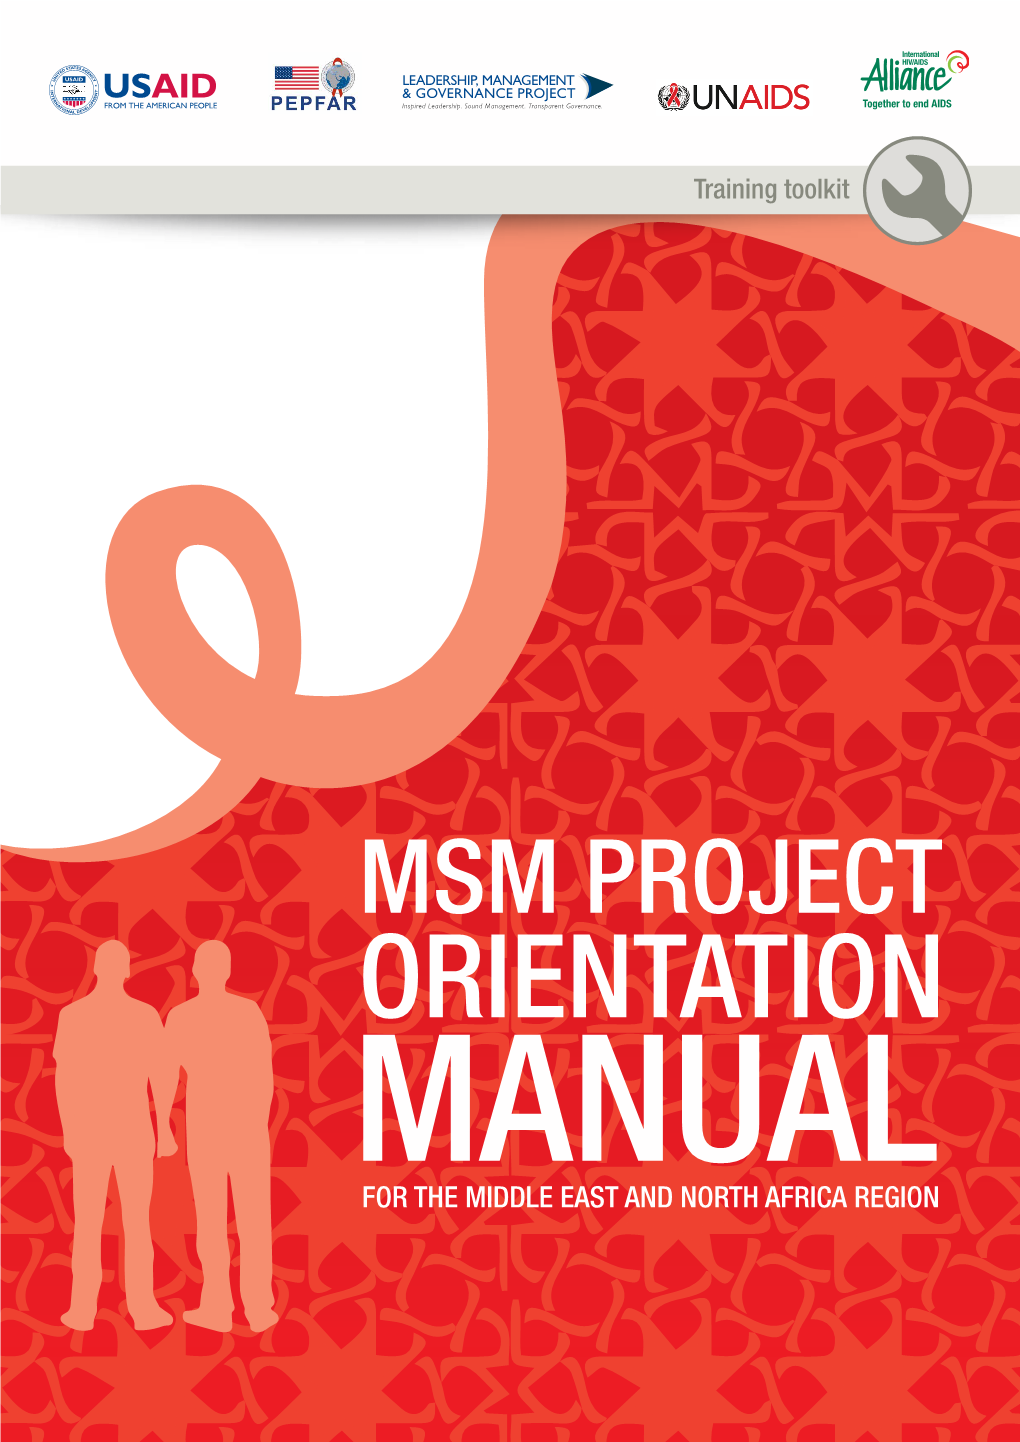 MSM Project Orientation Manual Was Written by John Howson, in Alliance and UNAIDS